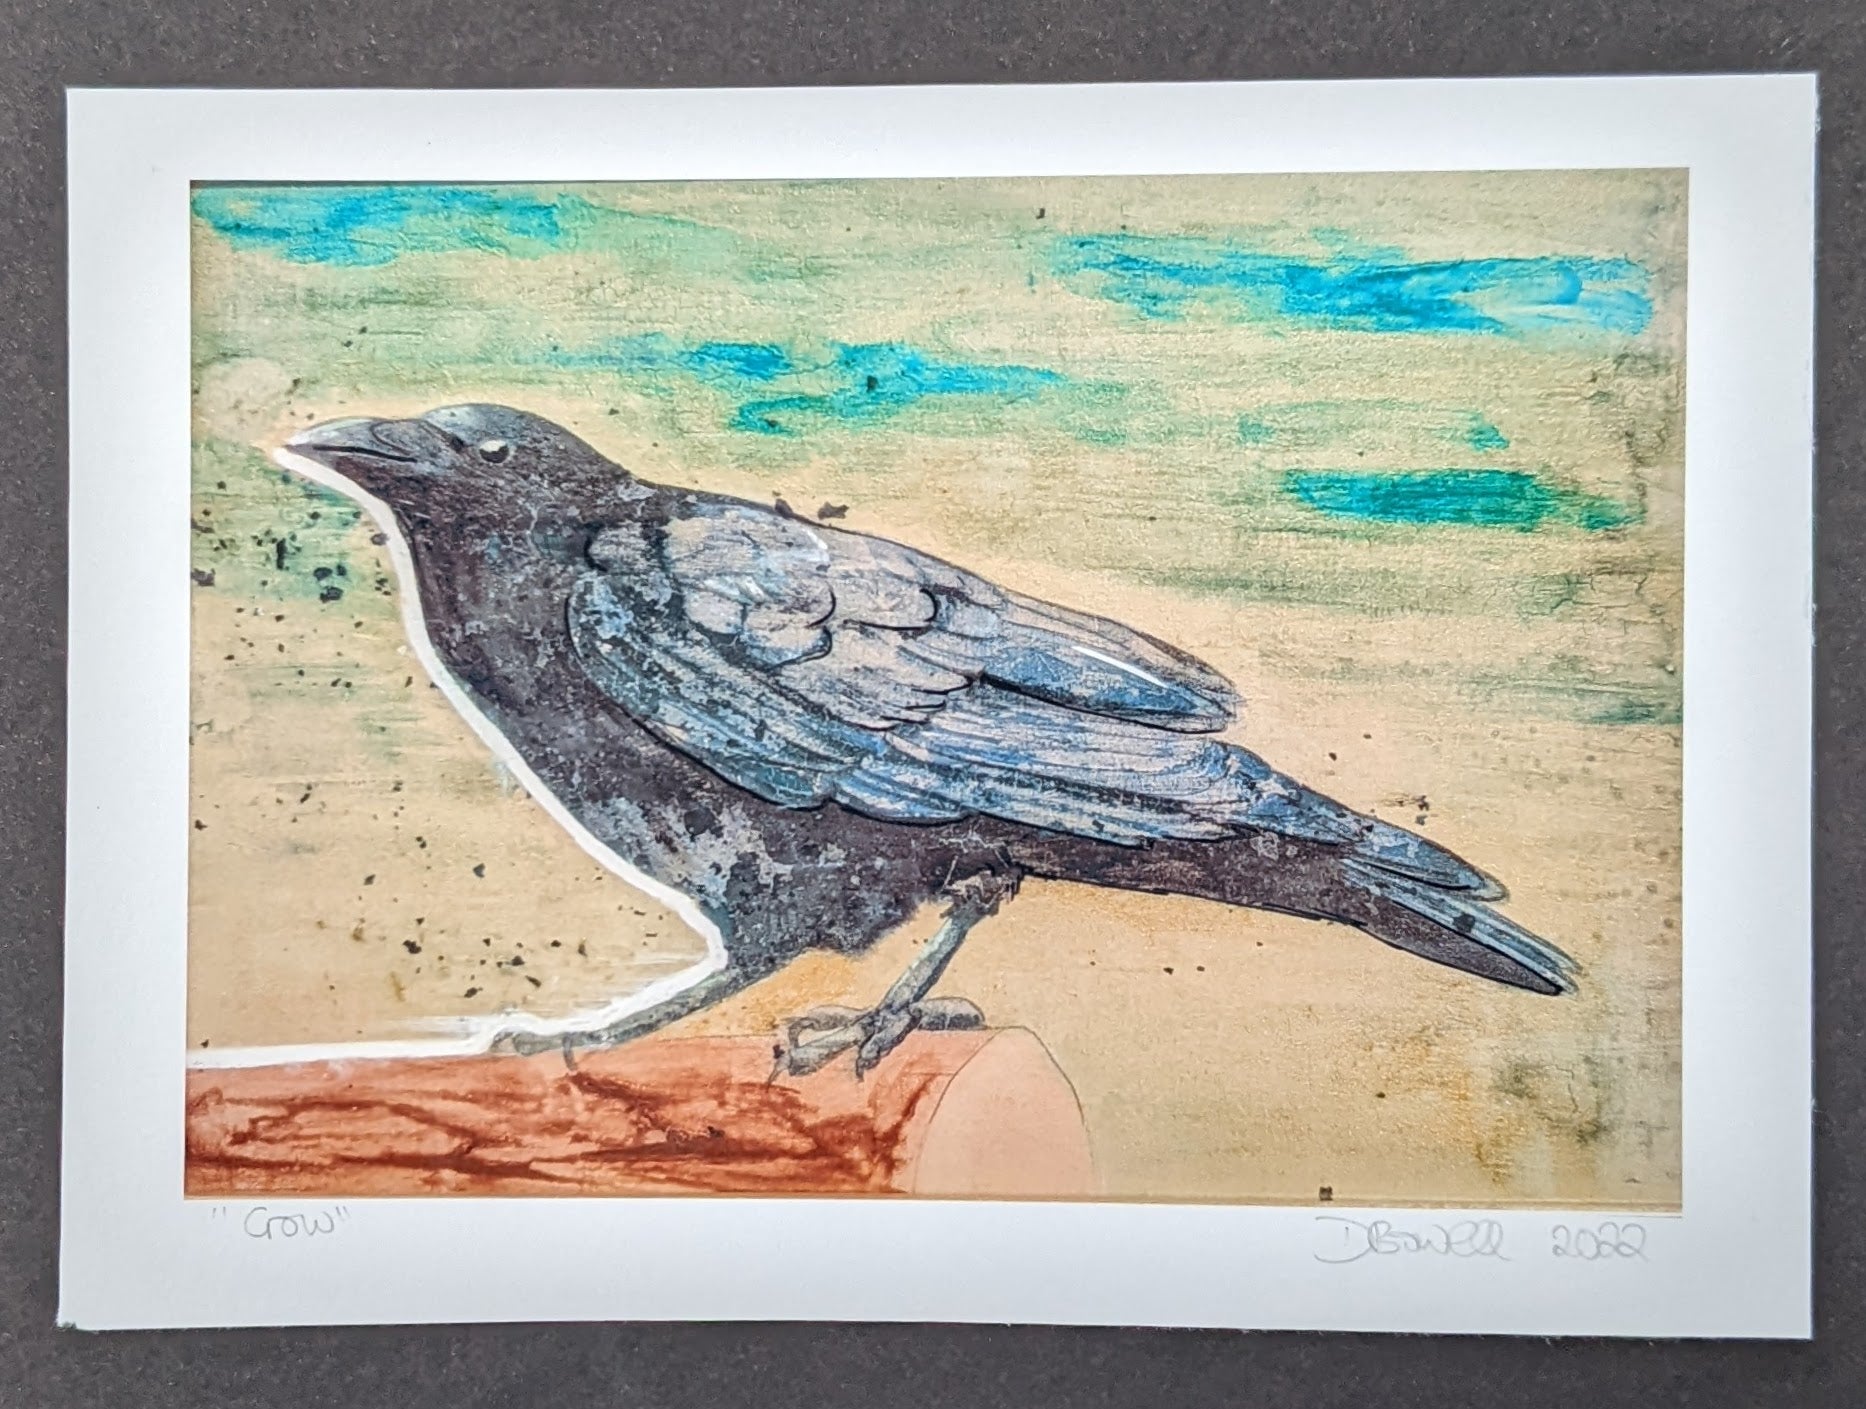 Print of the painting CROW, By British female artist Dianne Bowell, available in A4 or A5. Crow, corvid, artwork.